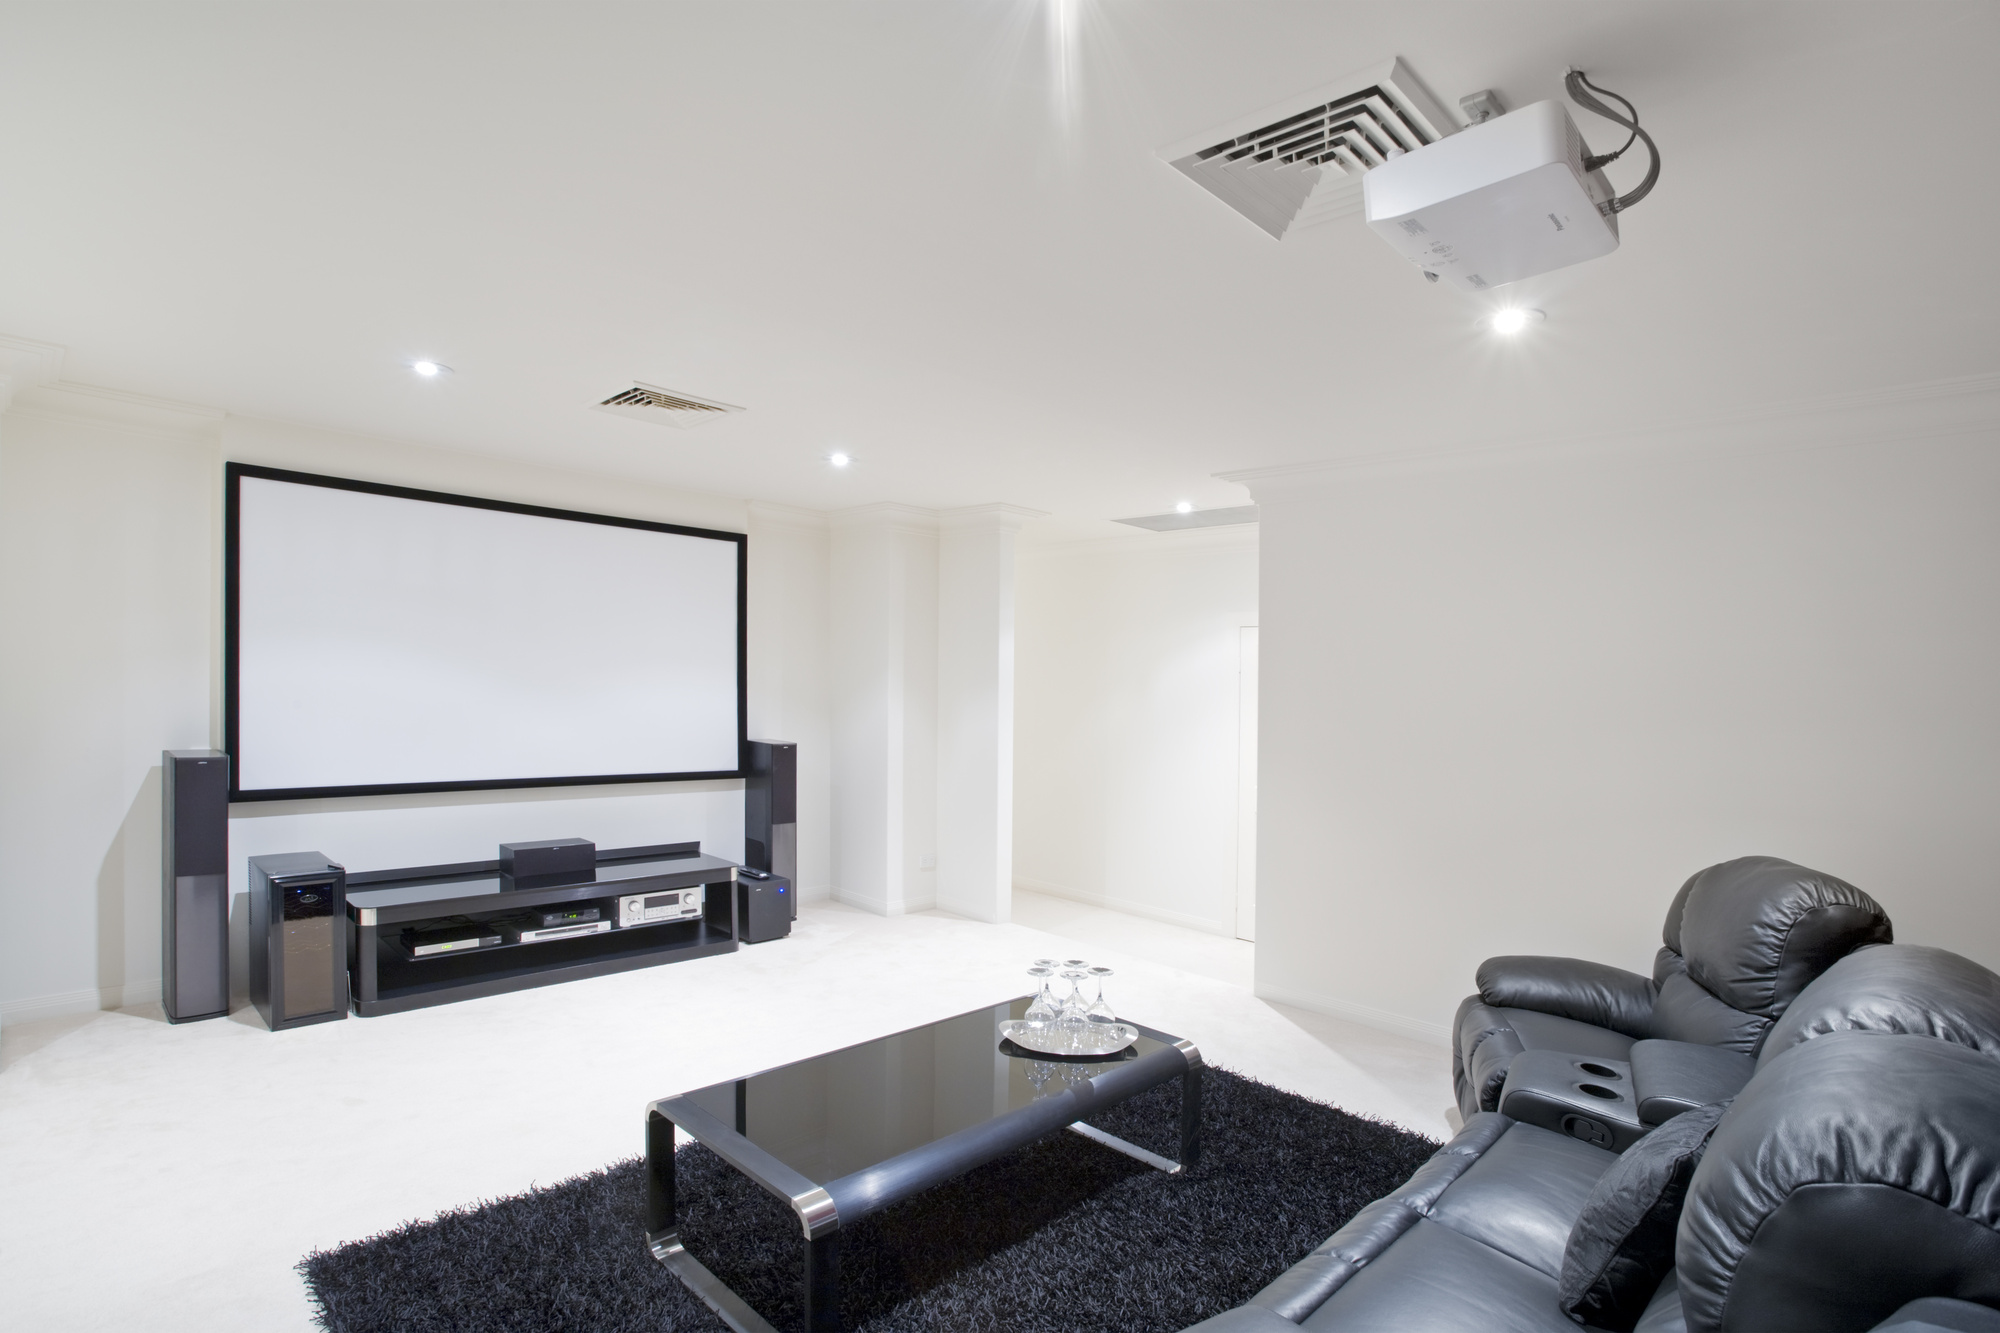 Do you want to create a cool family space? Then, read this article to discover inspiring media room ideas for your home!